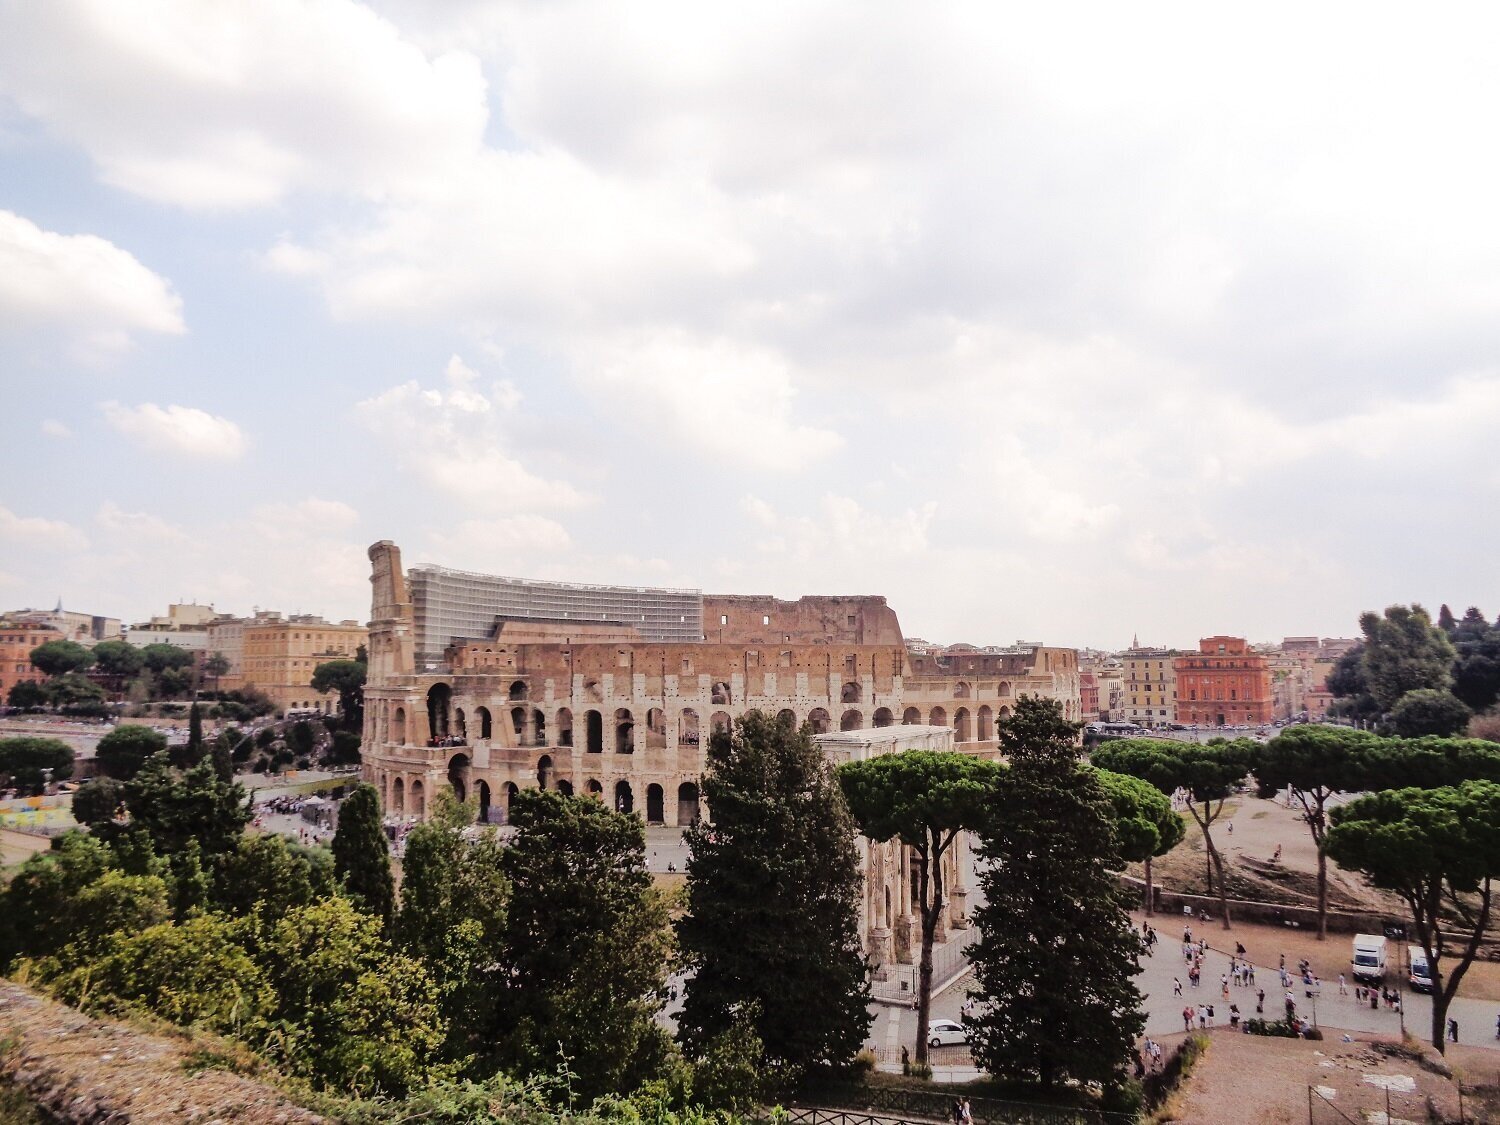 Views of the Colosseum